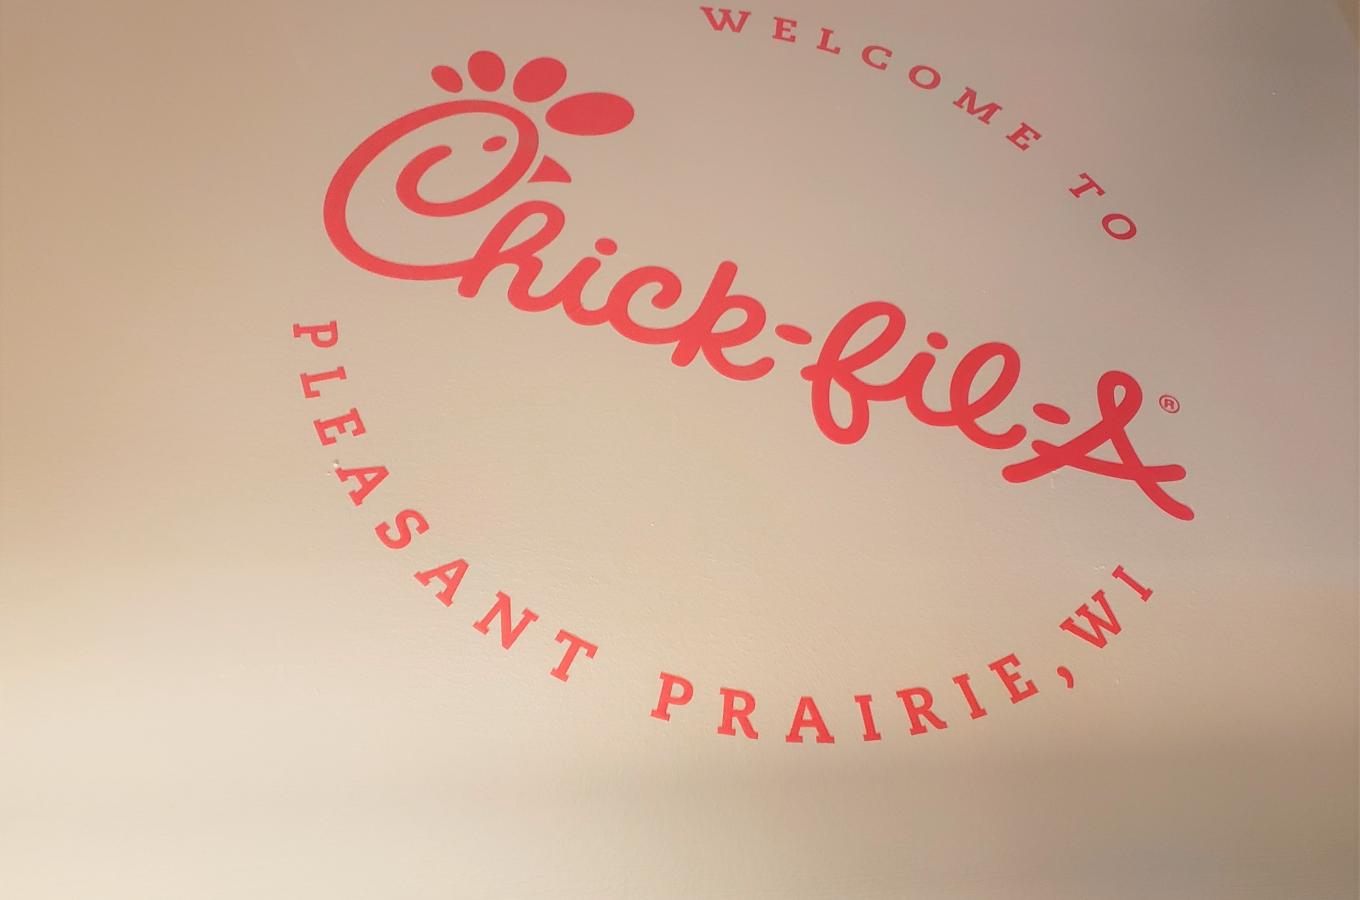 Chick-fil-A entry door stamp